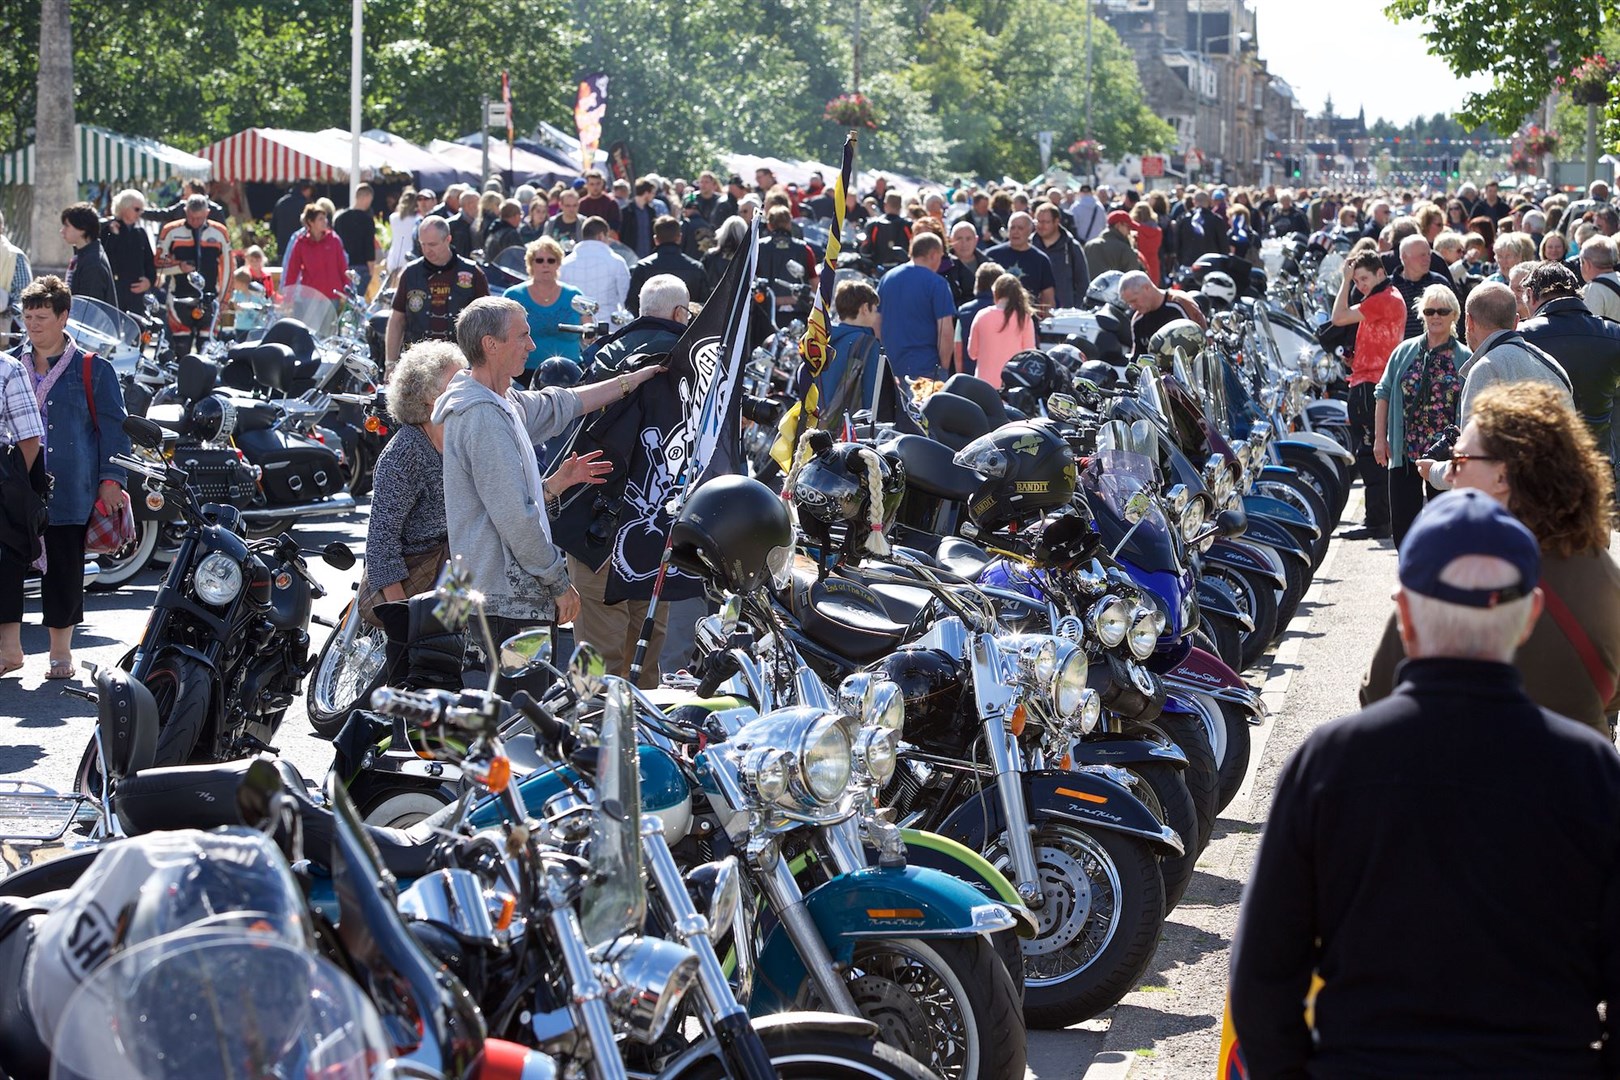 Thunder in the Glen is the biggest Harley Davidson gathering of its kind in the UK.